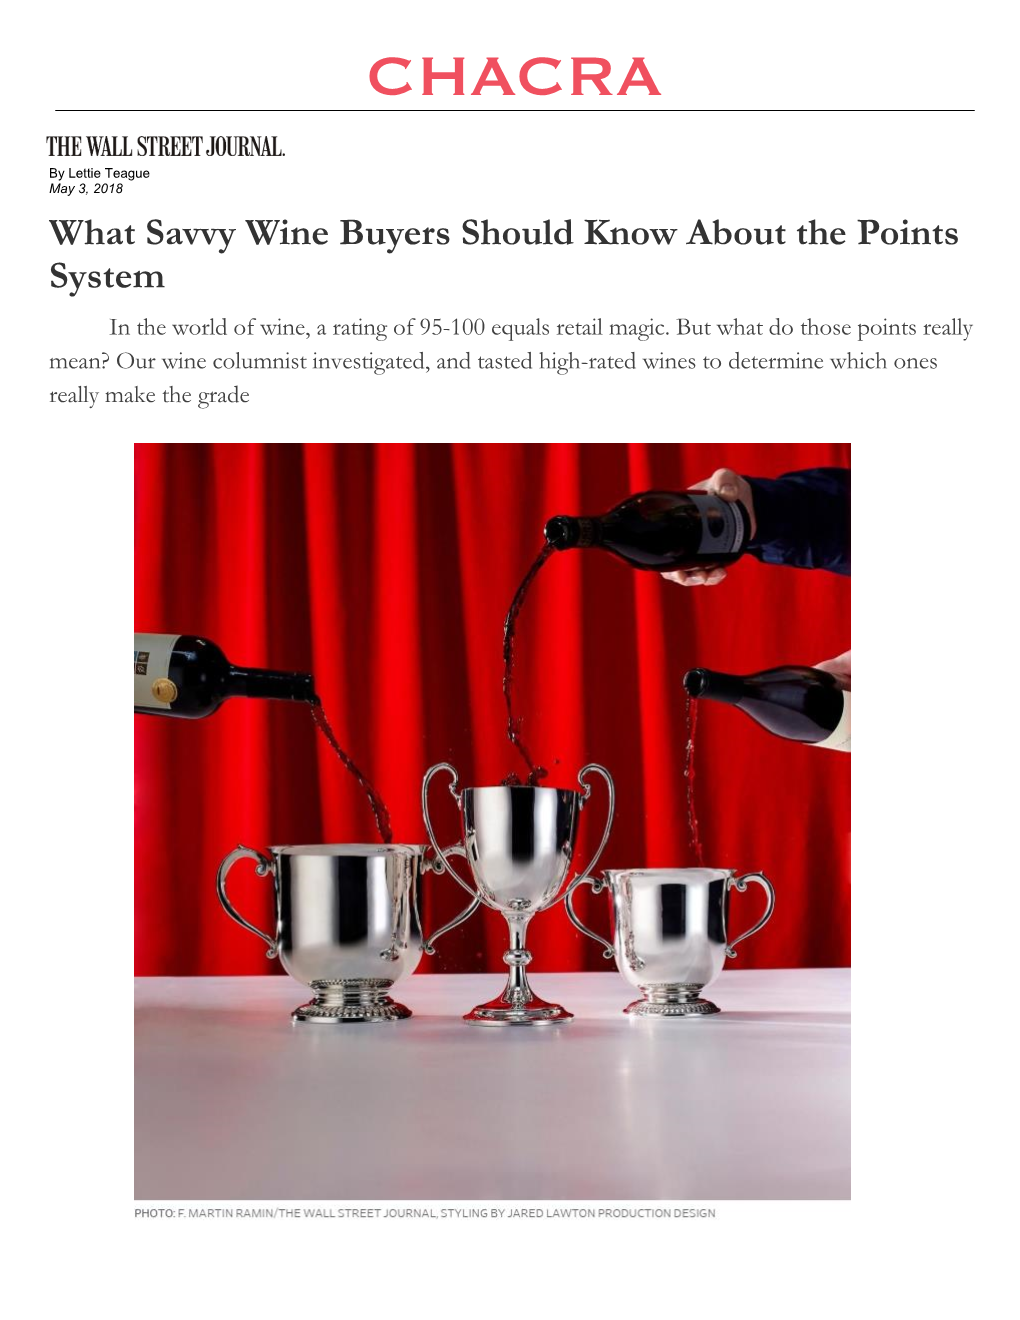 What Savvy Wine Buyers Should Know About the Points System in the World of Wine, a Rating of 95-100 Equals Retail Magic